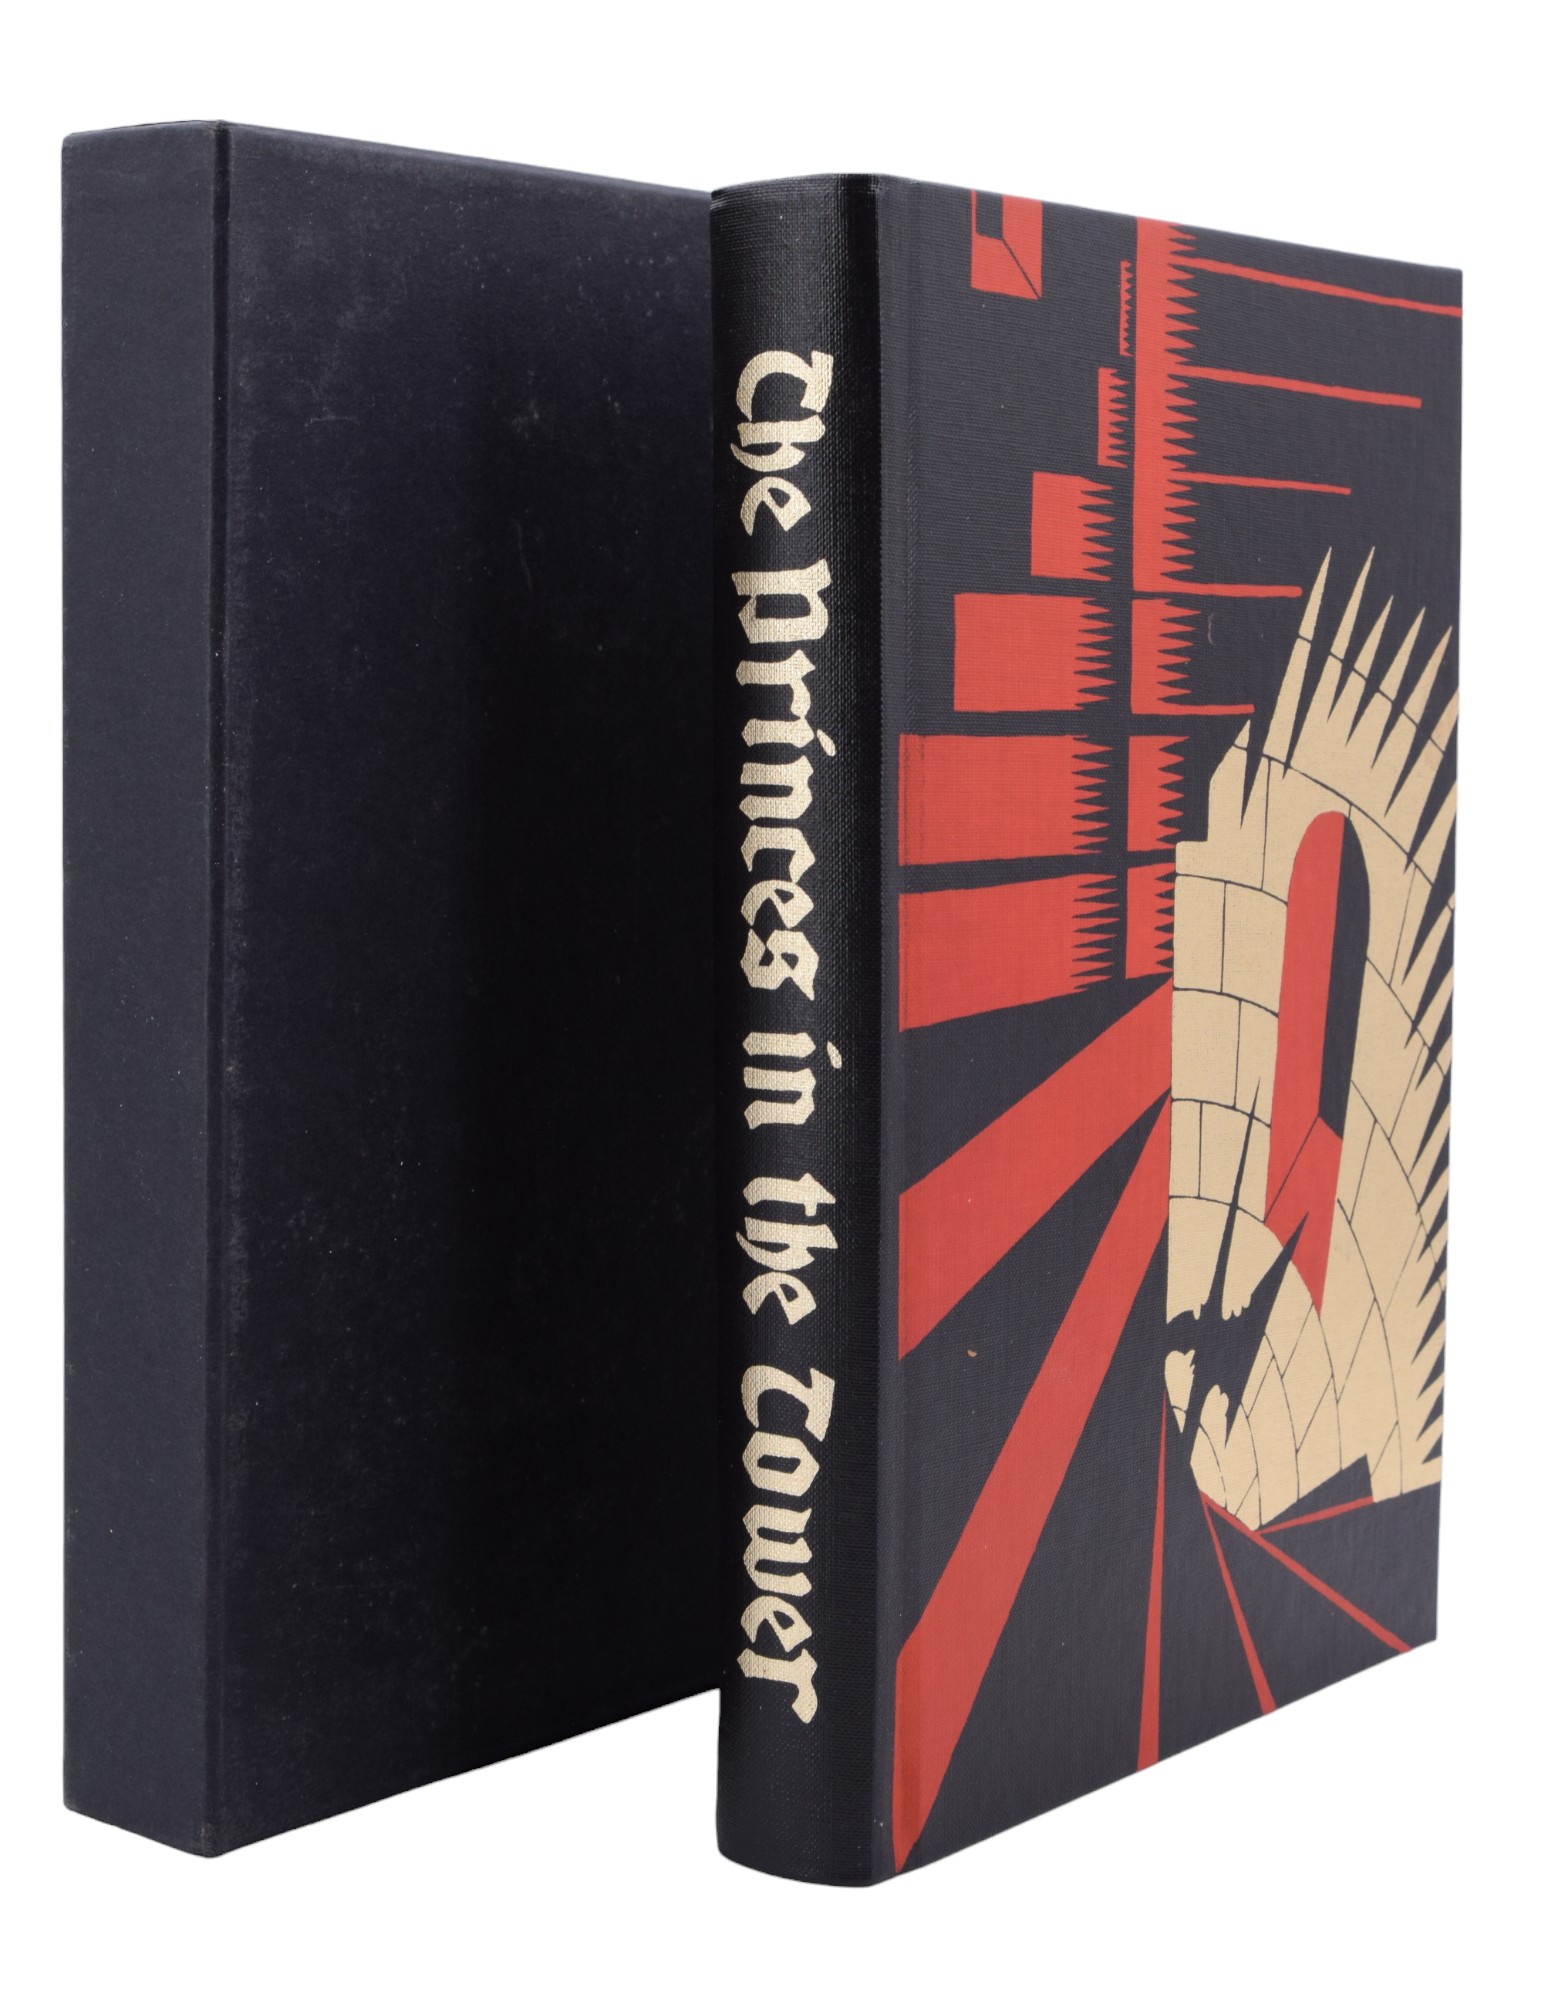 Seven Folio Society publications in slip cases, including Frances Wood, "The Silk Road", 2002; - Image 22 of 31